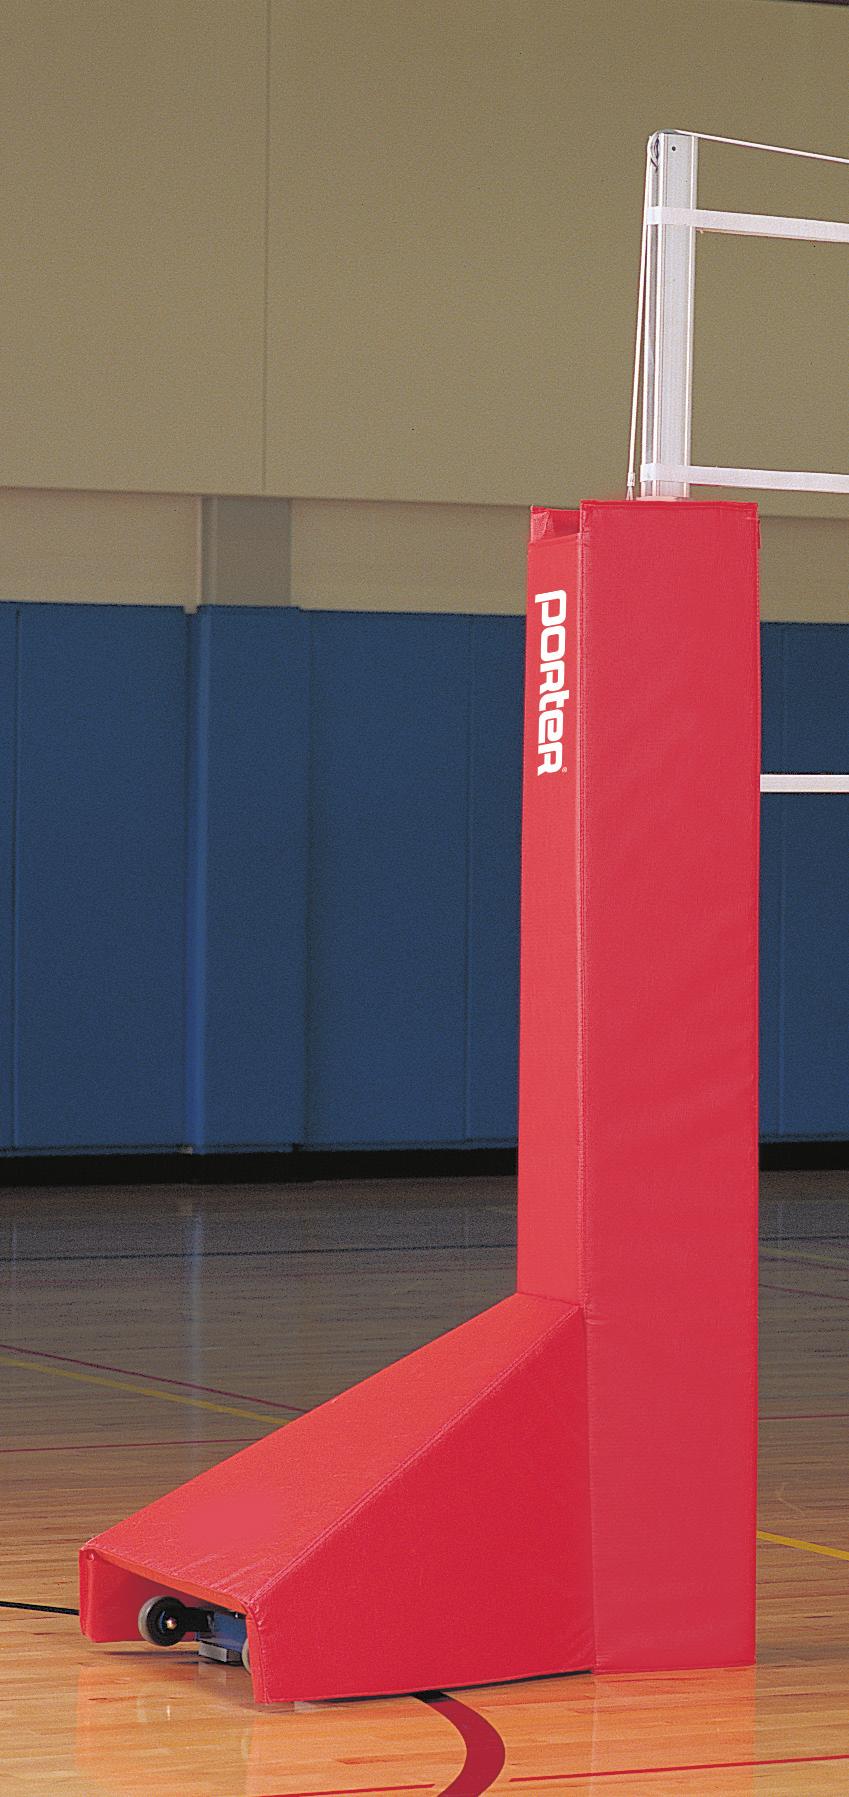 PORTER 29 VOLLEYBALL COLLECTION UPRIGHT PADDING CUSTOM GRAPHICS AVAILABLE Official Upright Pads Economy